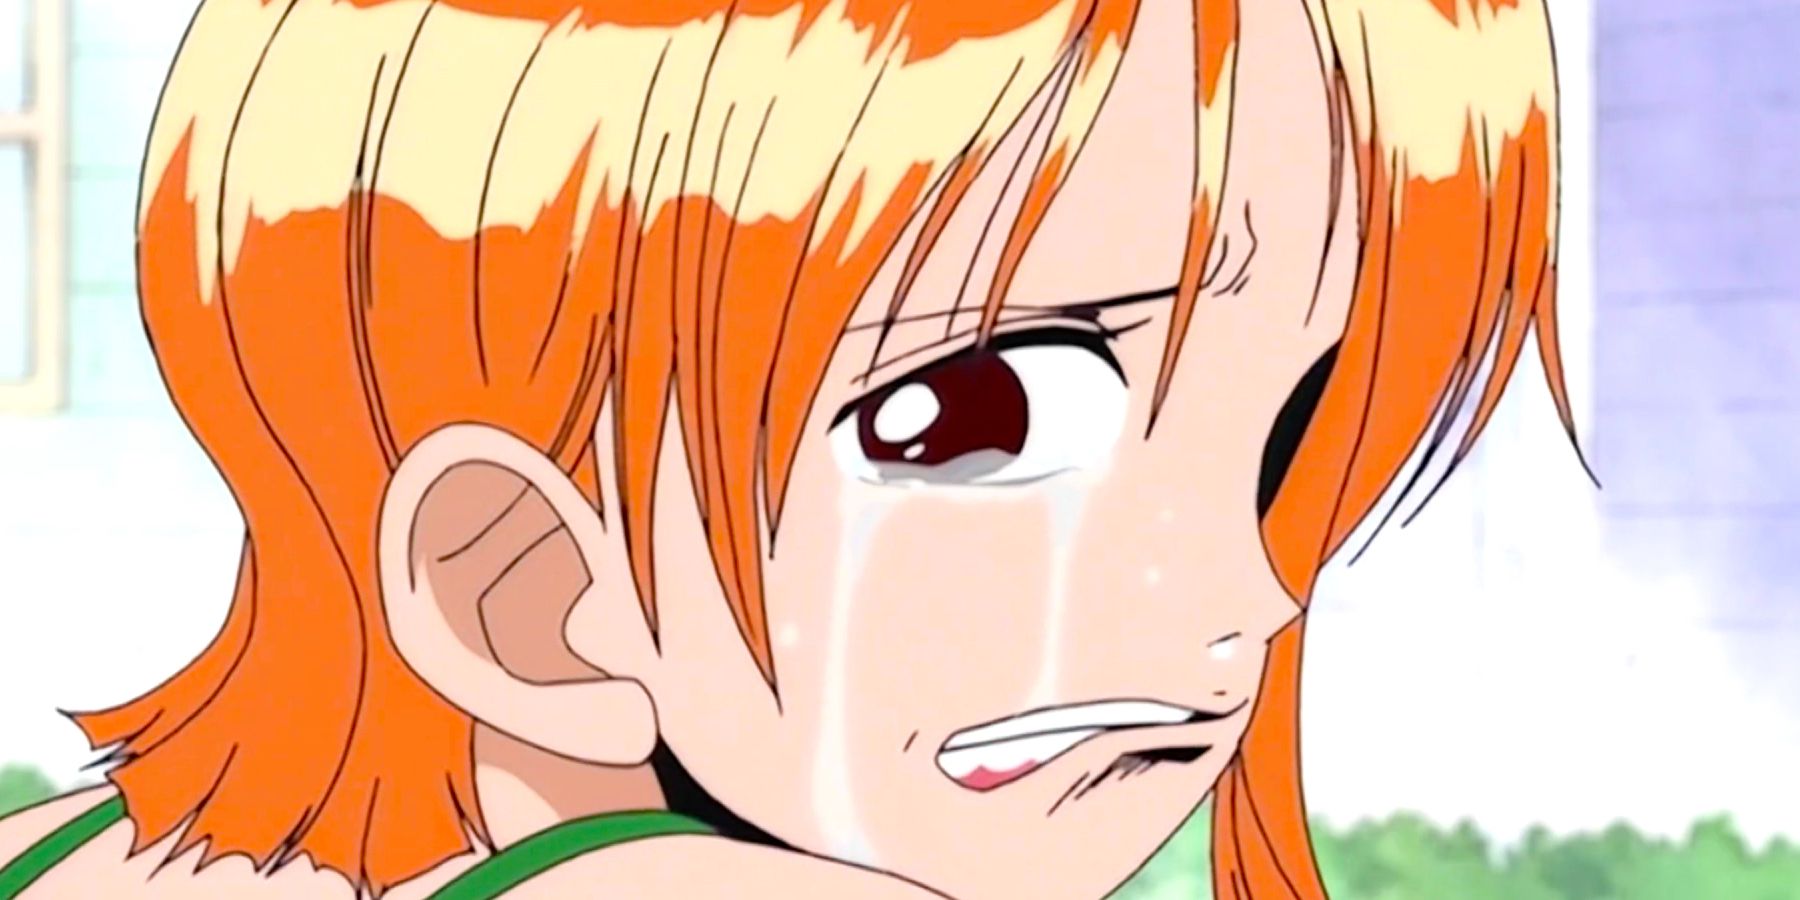 Nami crying asking Luffy for help in One Piece anime episode 37.